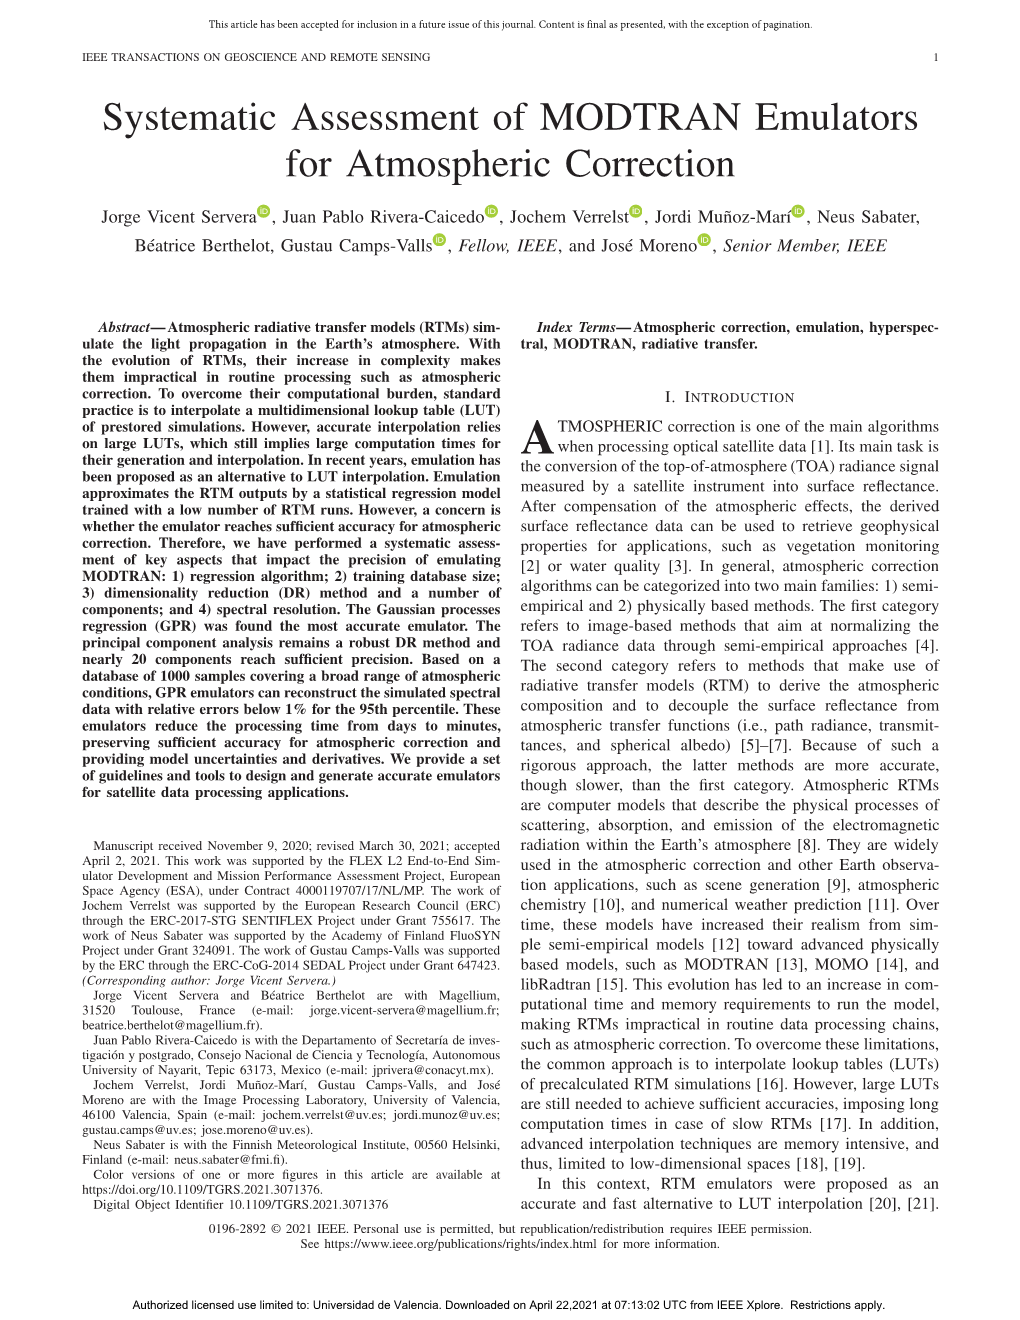 Systematic Assessment of MODTRAN Emulators for Atmospheric Correction